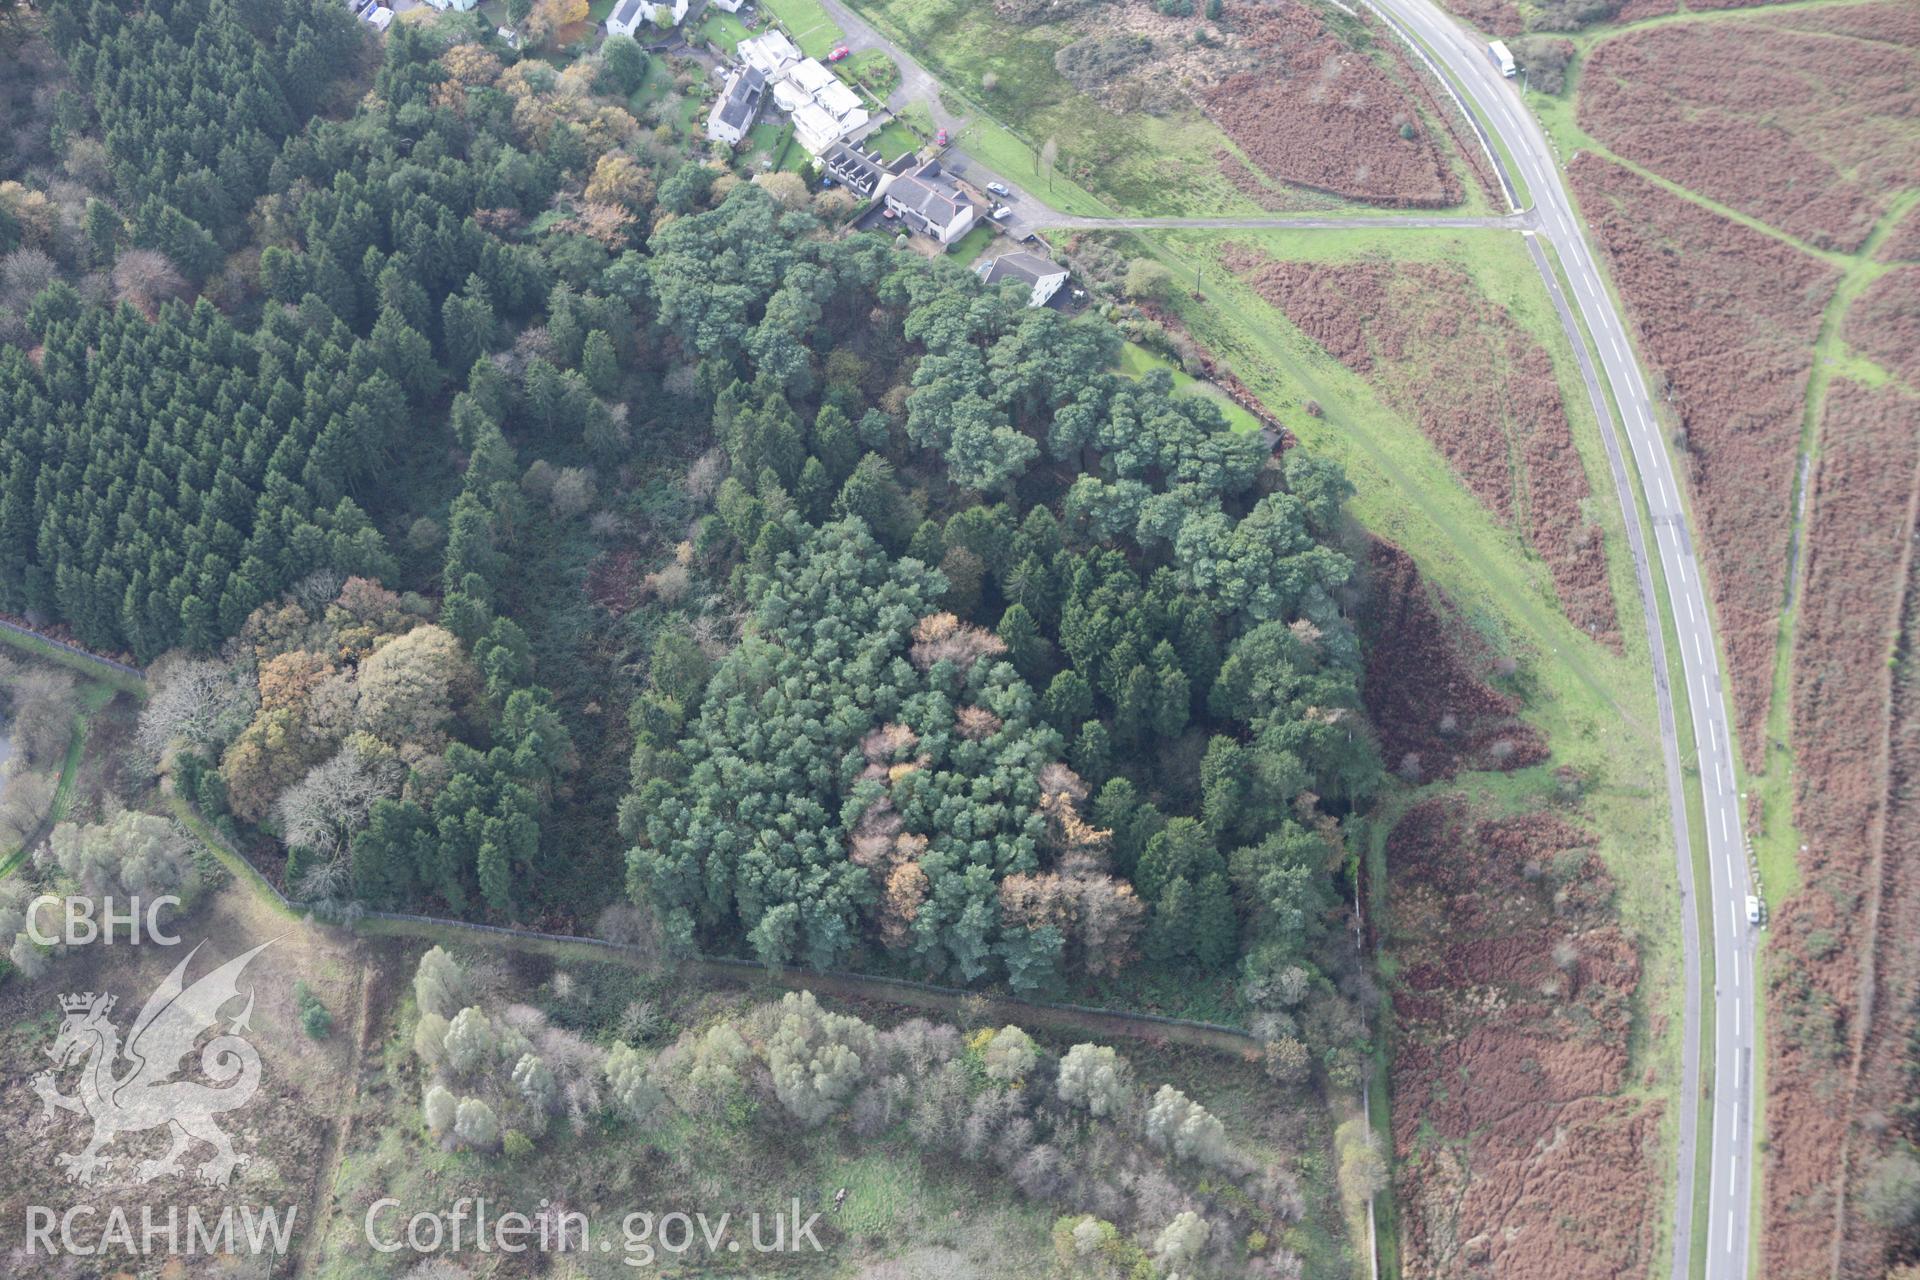 RCAHMW colour oblique photograph of Coity Higher Moat. Taken by Toby Driver on 17/11/2011.